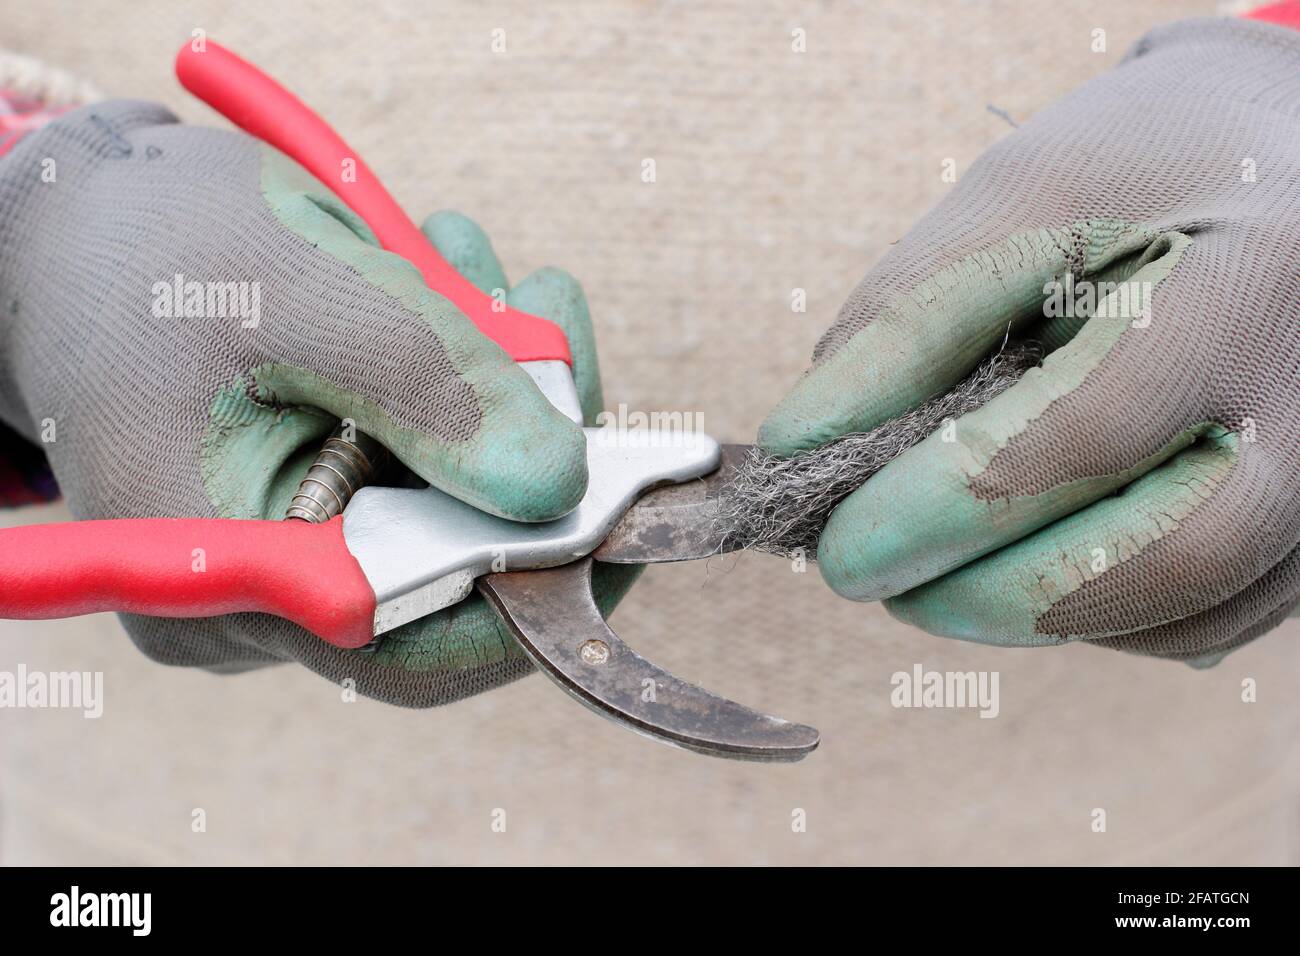 Cleaning secateur blades with wire wool. UK Stock Photo